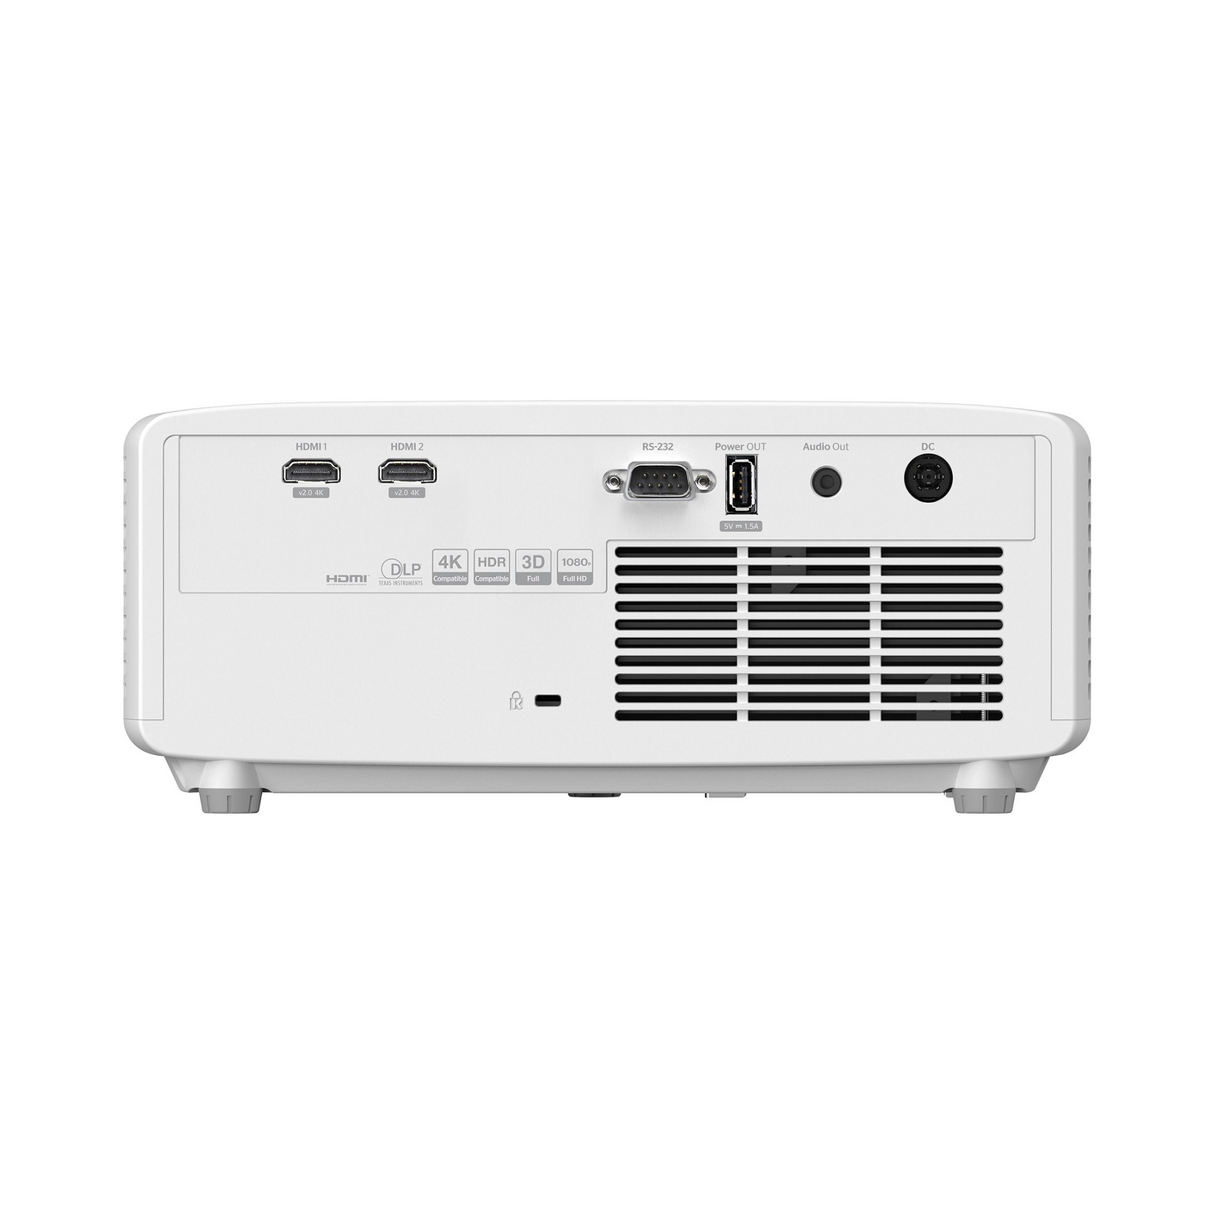 Optoma HZ40HDR Compact  Full HD Laser Home Projector